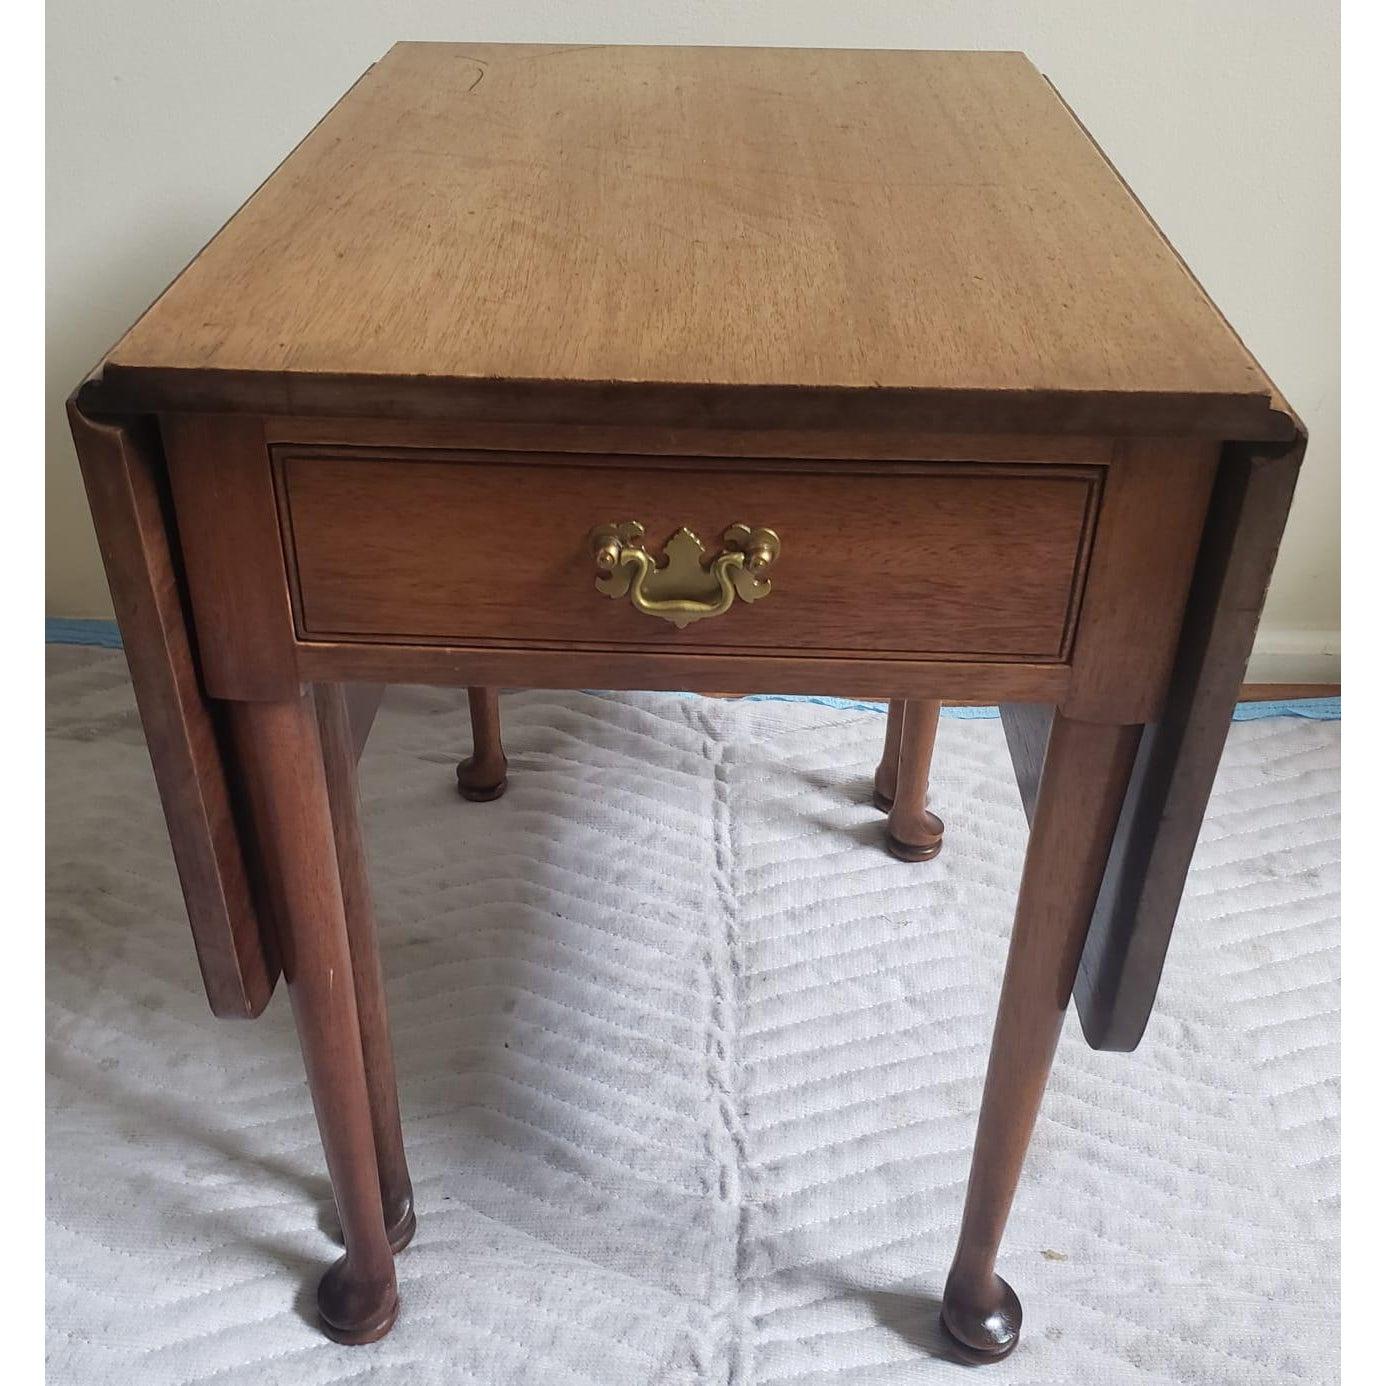 Biggs Richmond's, a division of the famous KITTINGER Furniture, Chippendale Mahogany Small Drop Leaf Table Pembroke Table. Table is in excellent structural condition with some finish loss. No obvious scratches.
Table measures 15